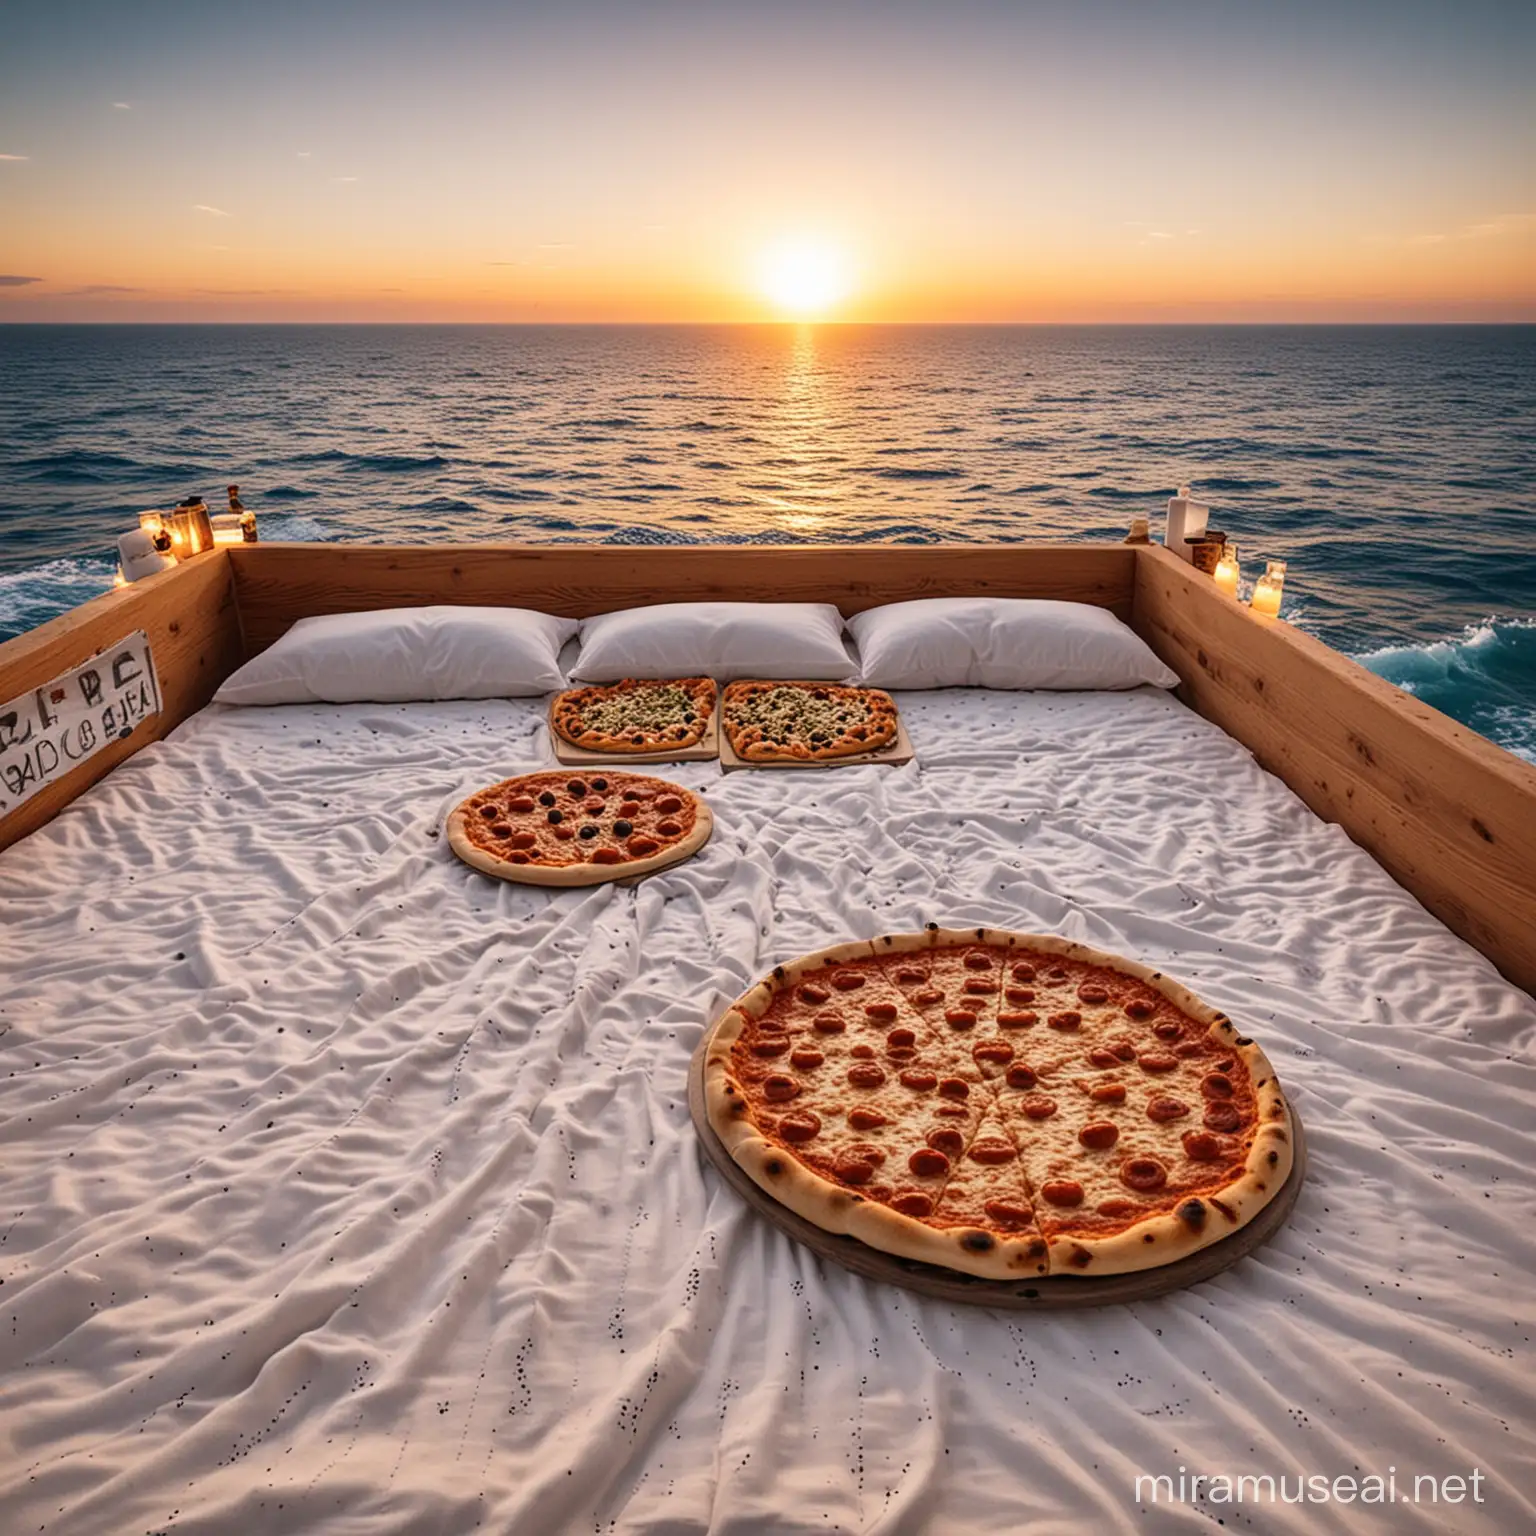 pizza and pasta on a bed on an endless ocean